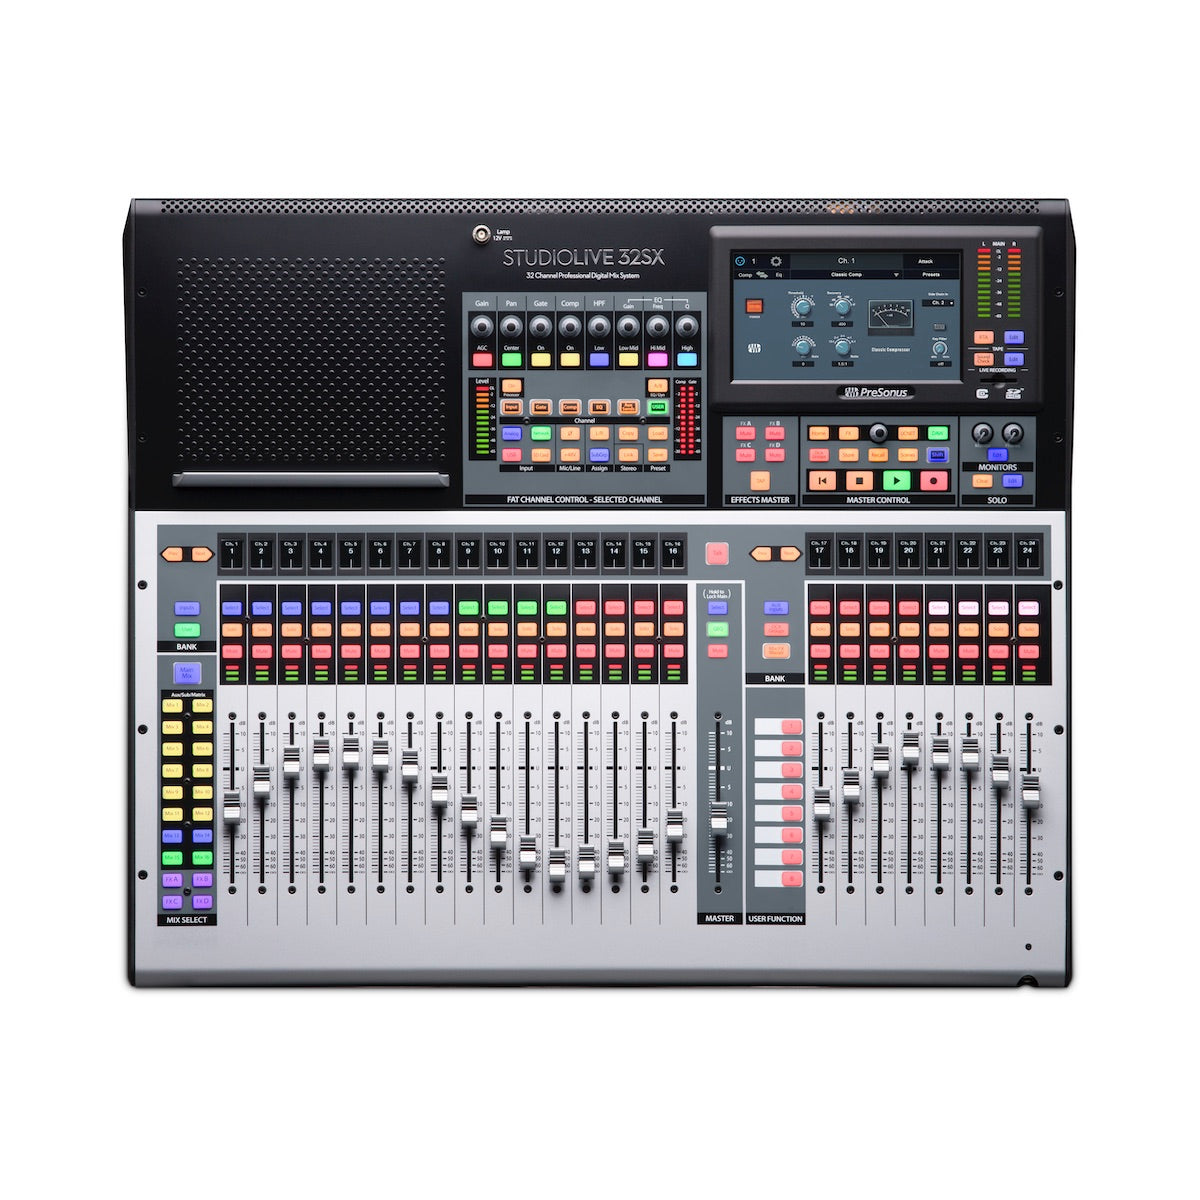 PreSonus StudioLive 32SX - Compact 32-channel Digital Mixer with Effects, top